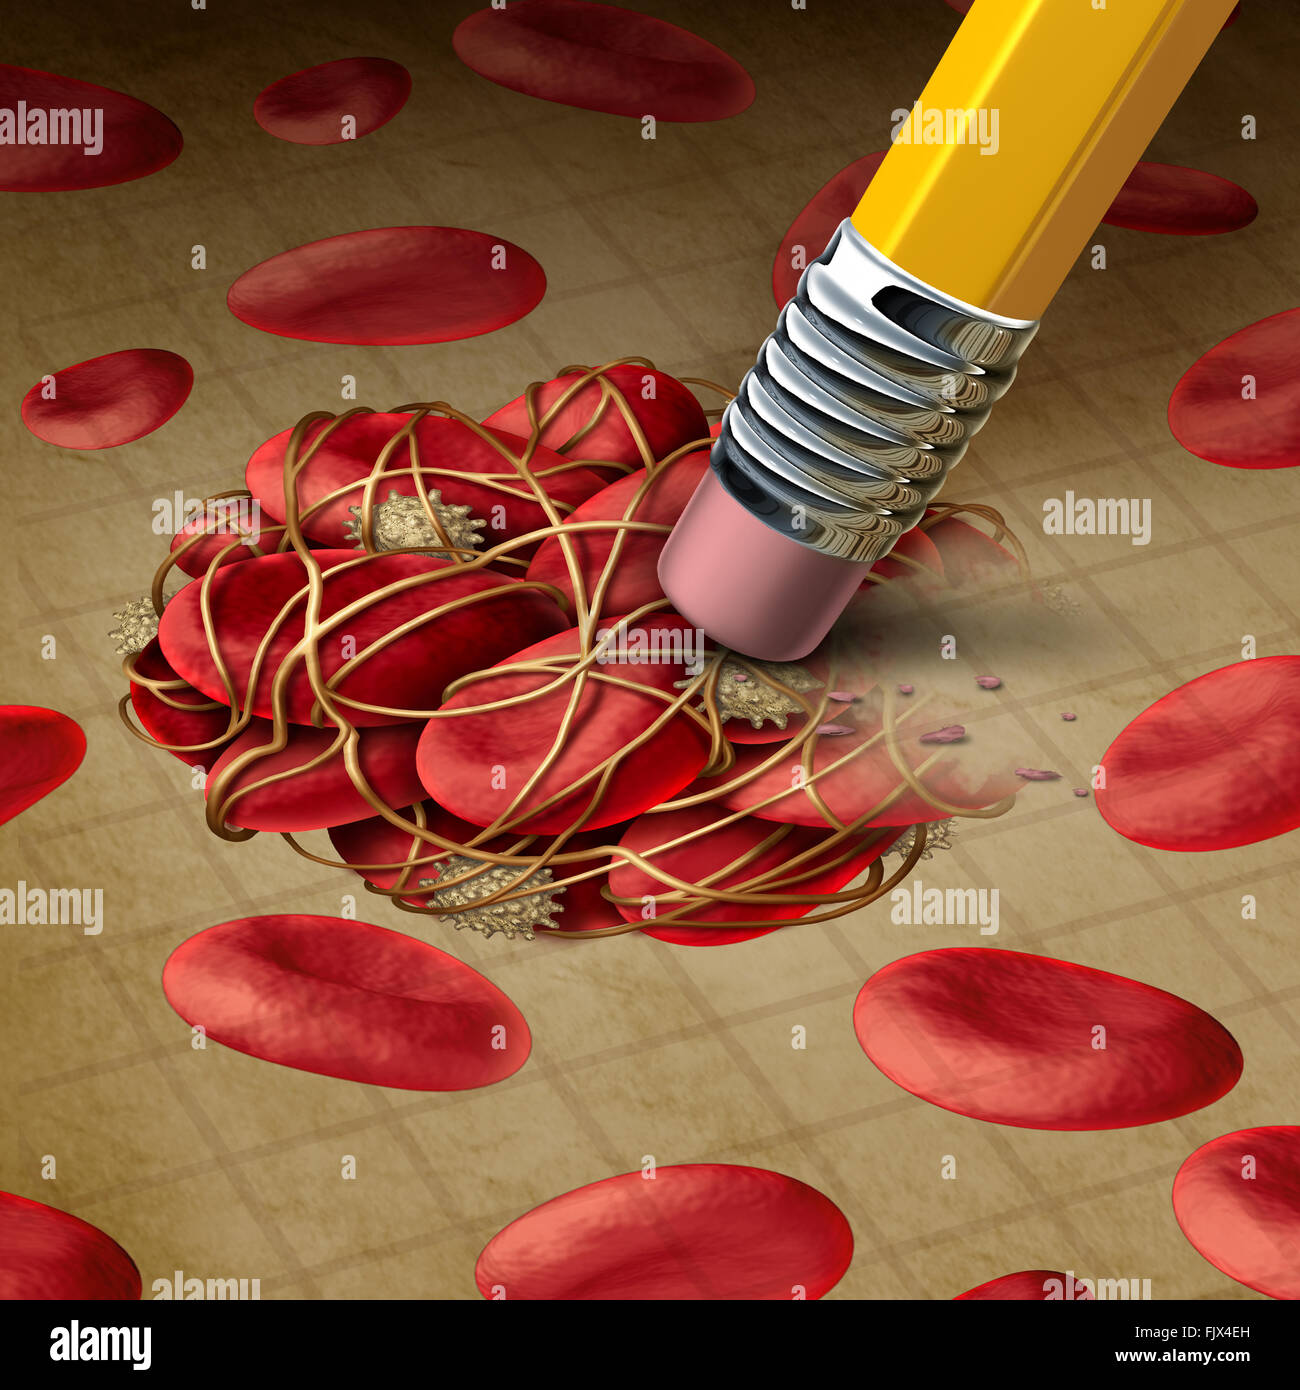 Blood clot and thrombosis treatment removing clots concept as a pencil eraser erasing the dangerous blockage clumped  by sticky Stock Photo